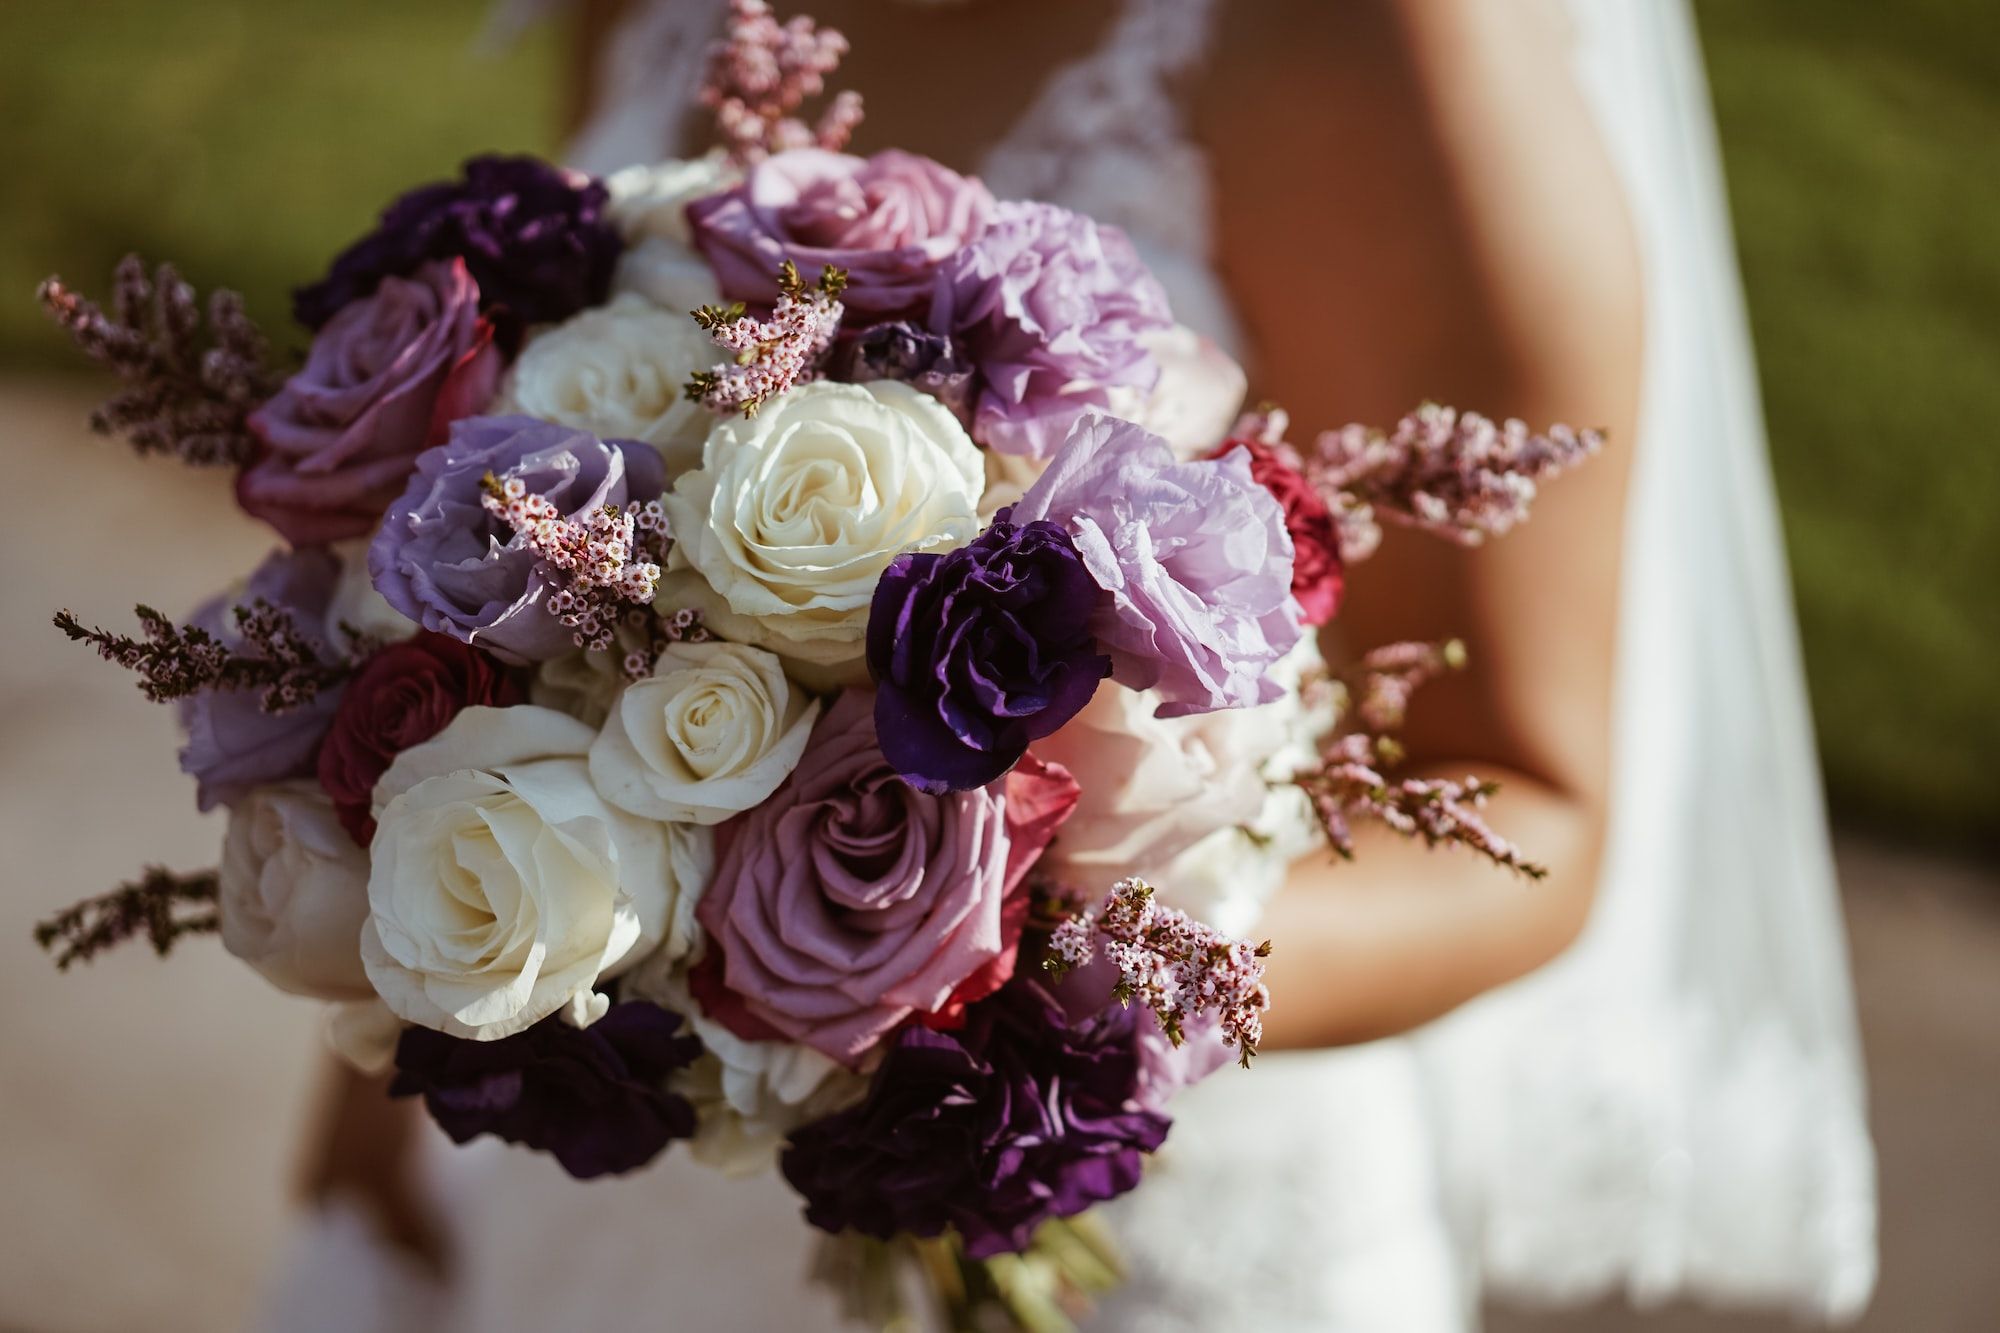 Hypnotherapy for wedding anxiety and overwhelm